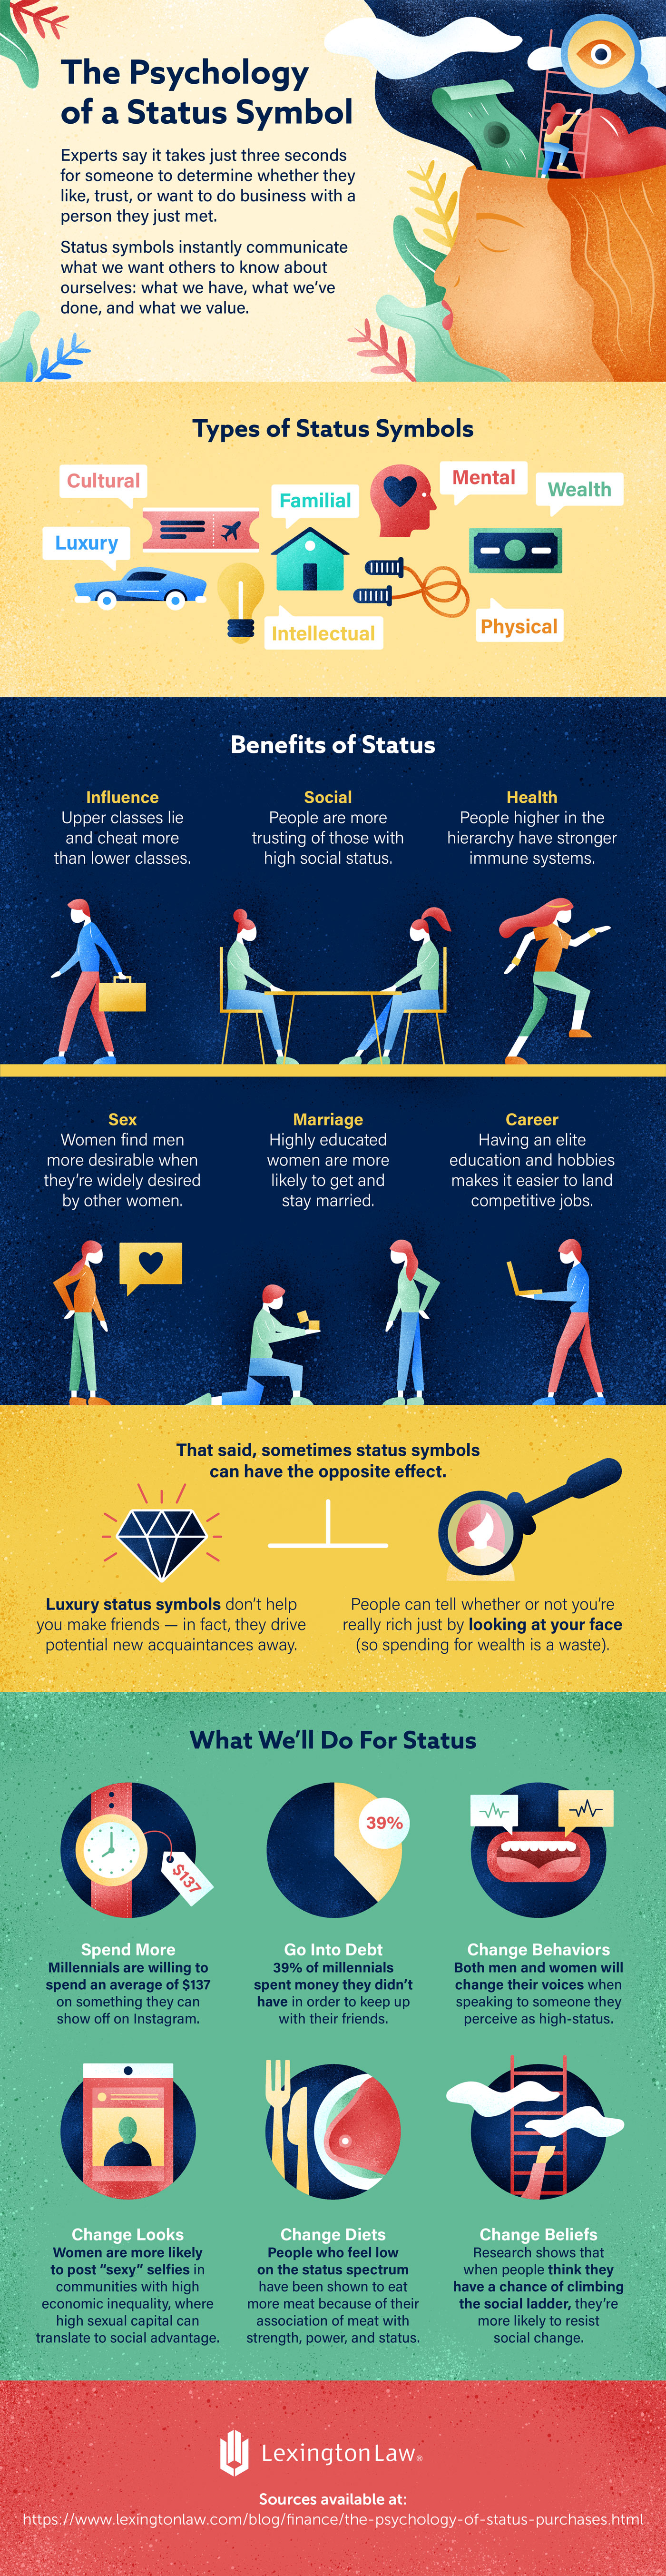 psychology of a status symbol infographic